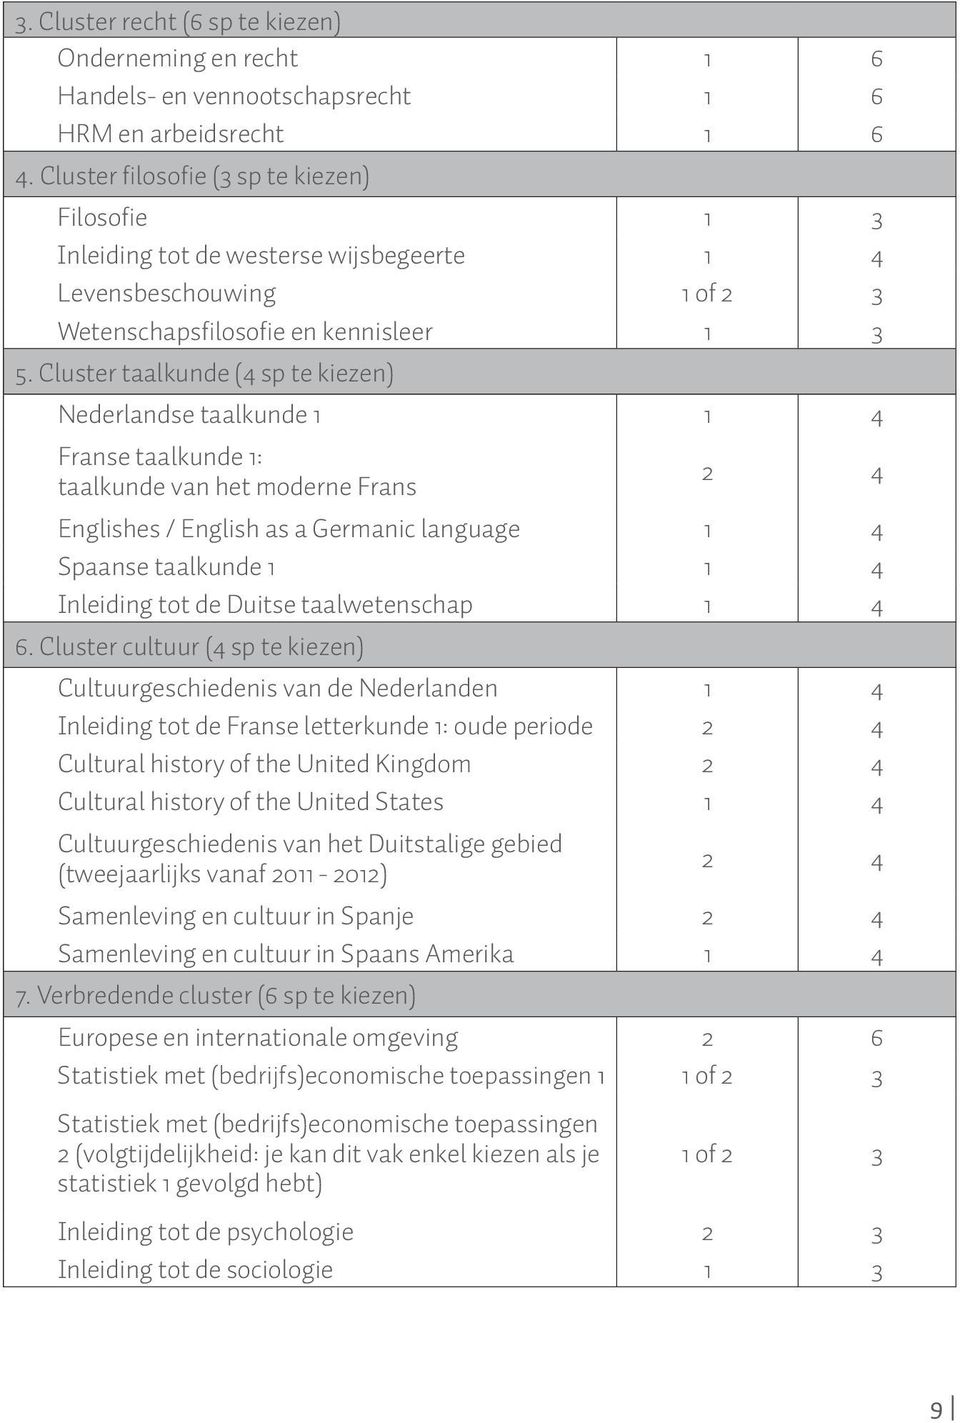 Cluster taalkunde (4 sp te kiezen) Nederlandse taalkunde 1 1 4 Franse taalkunde 1: taalkunde van het moderne Frans 2 4 Englishes / English as a Germanic language 1 4 Spaanse taalkunde 1 1 4 Inleiding